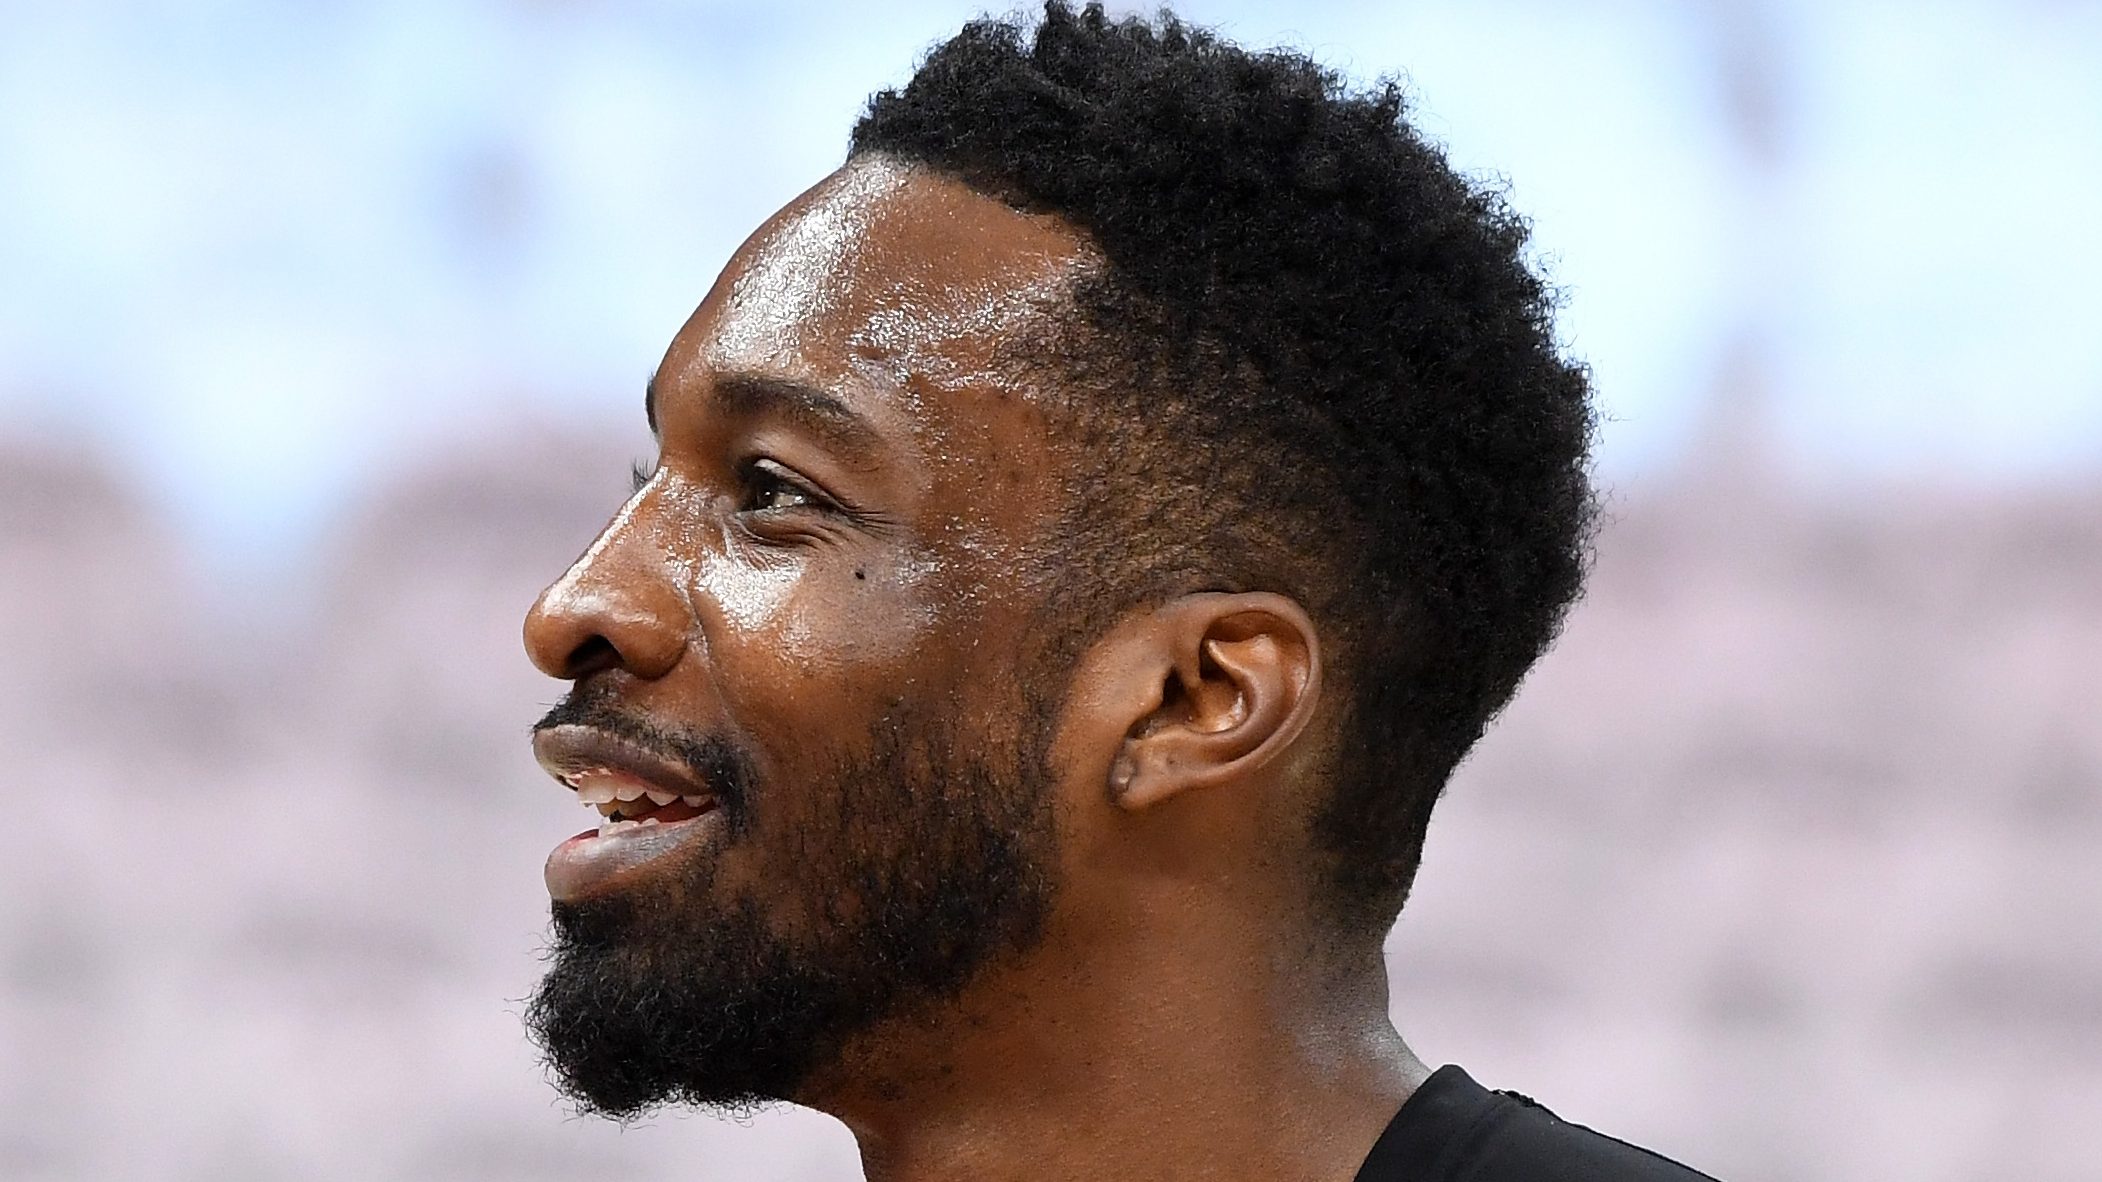 Jeff Green EXCLUSIVE: His open-heart surgery tell all